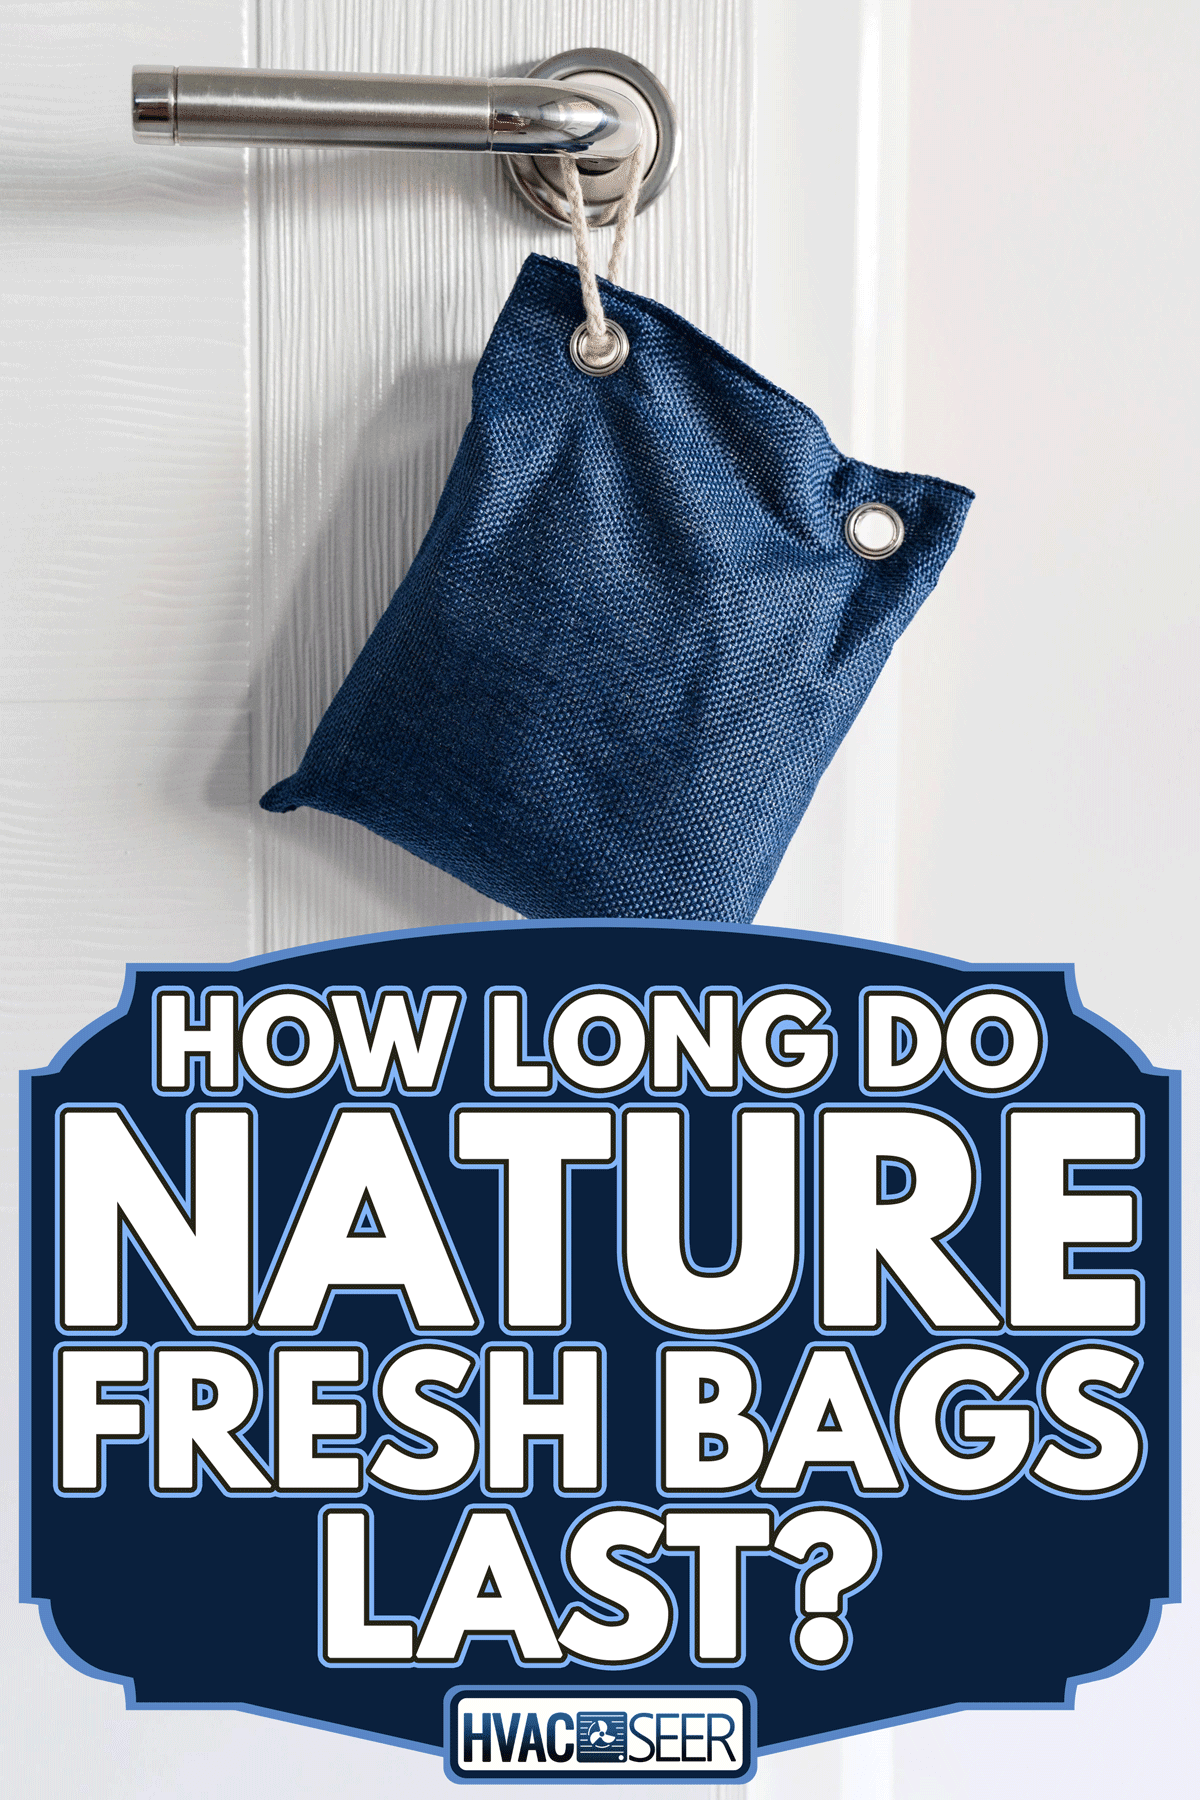 An air purify bag charcoal activated carbon moisture absorber, How Long Do Nature Fresh Bags Last?